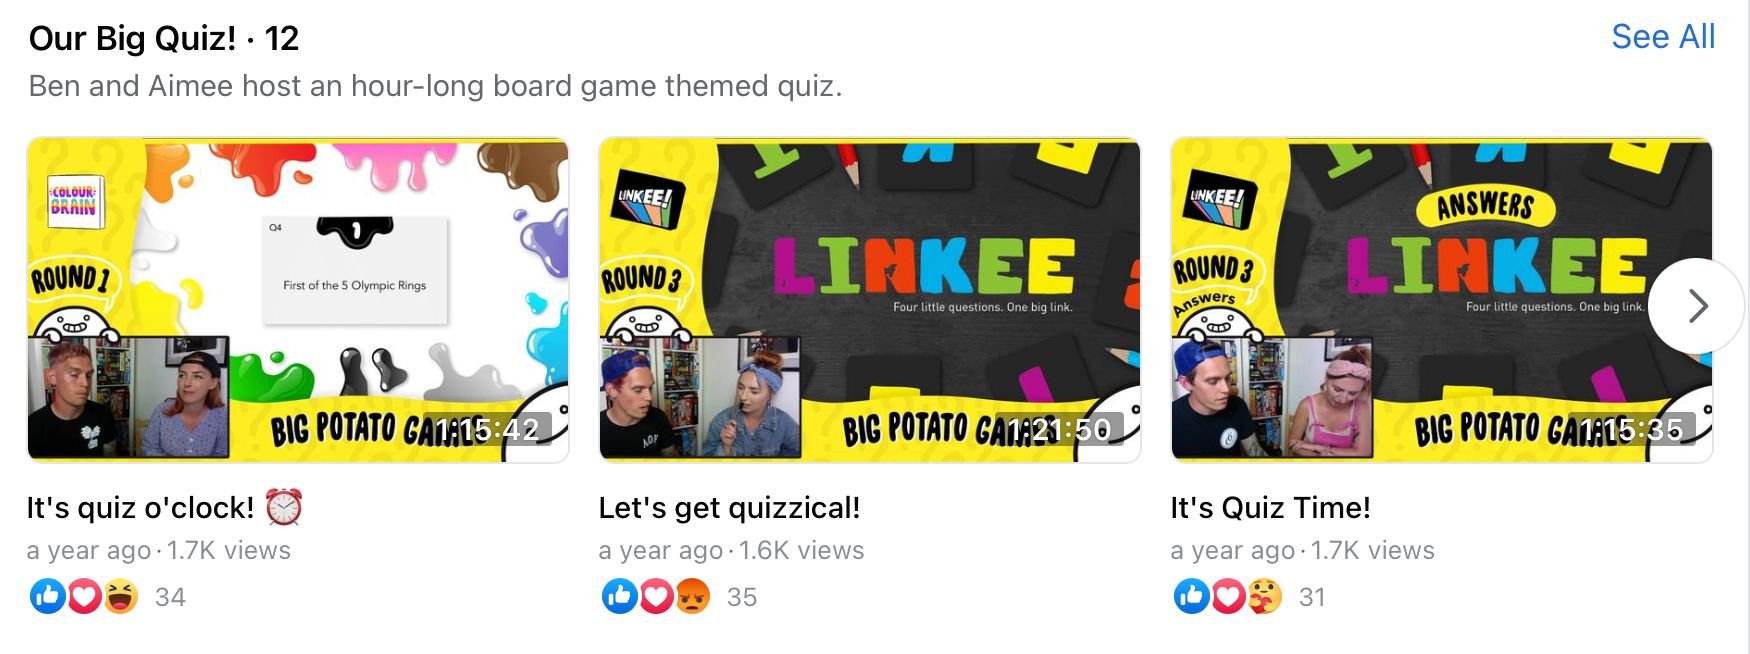 Facebook video playlist for long-form live streams of ‘Our Big Quiz!’ by @bigpotatogames